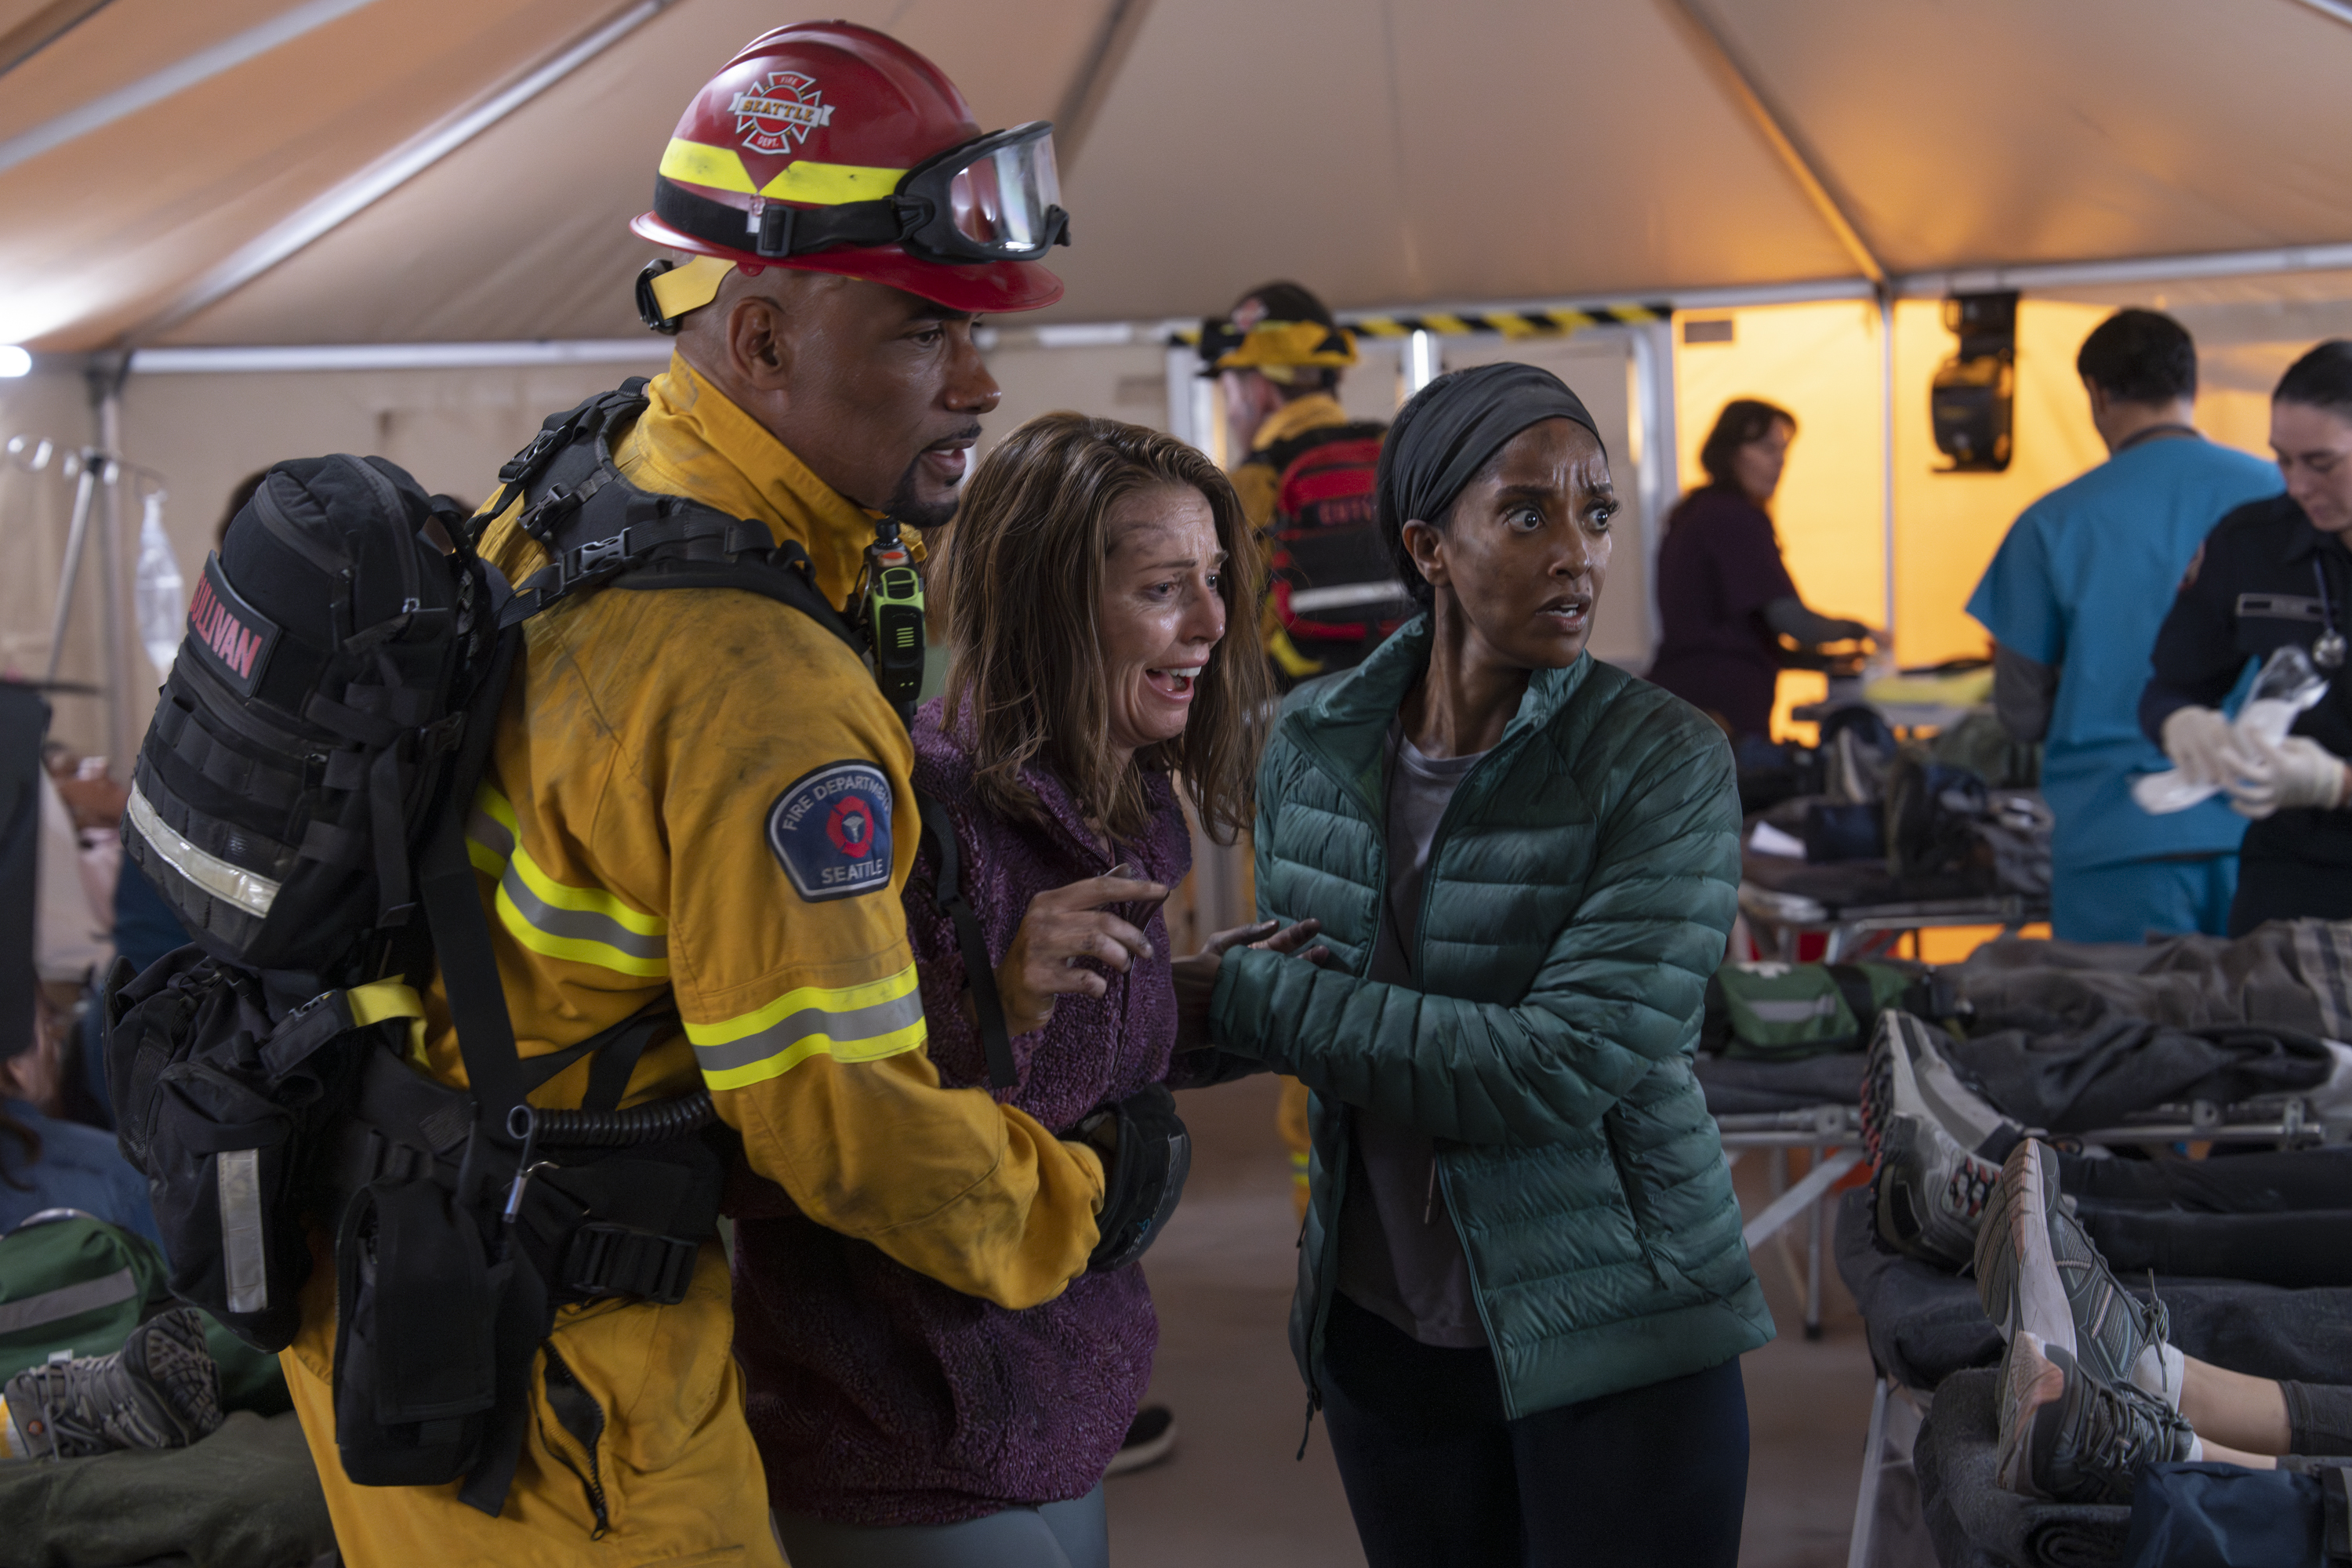 Best-bets for May 30: “Station 19” goes out blazing